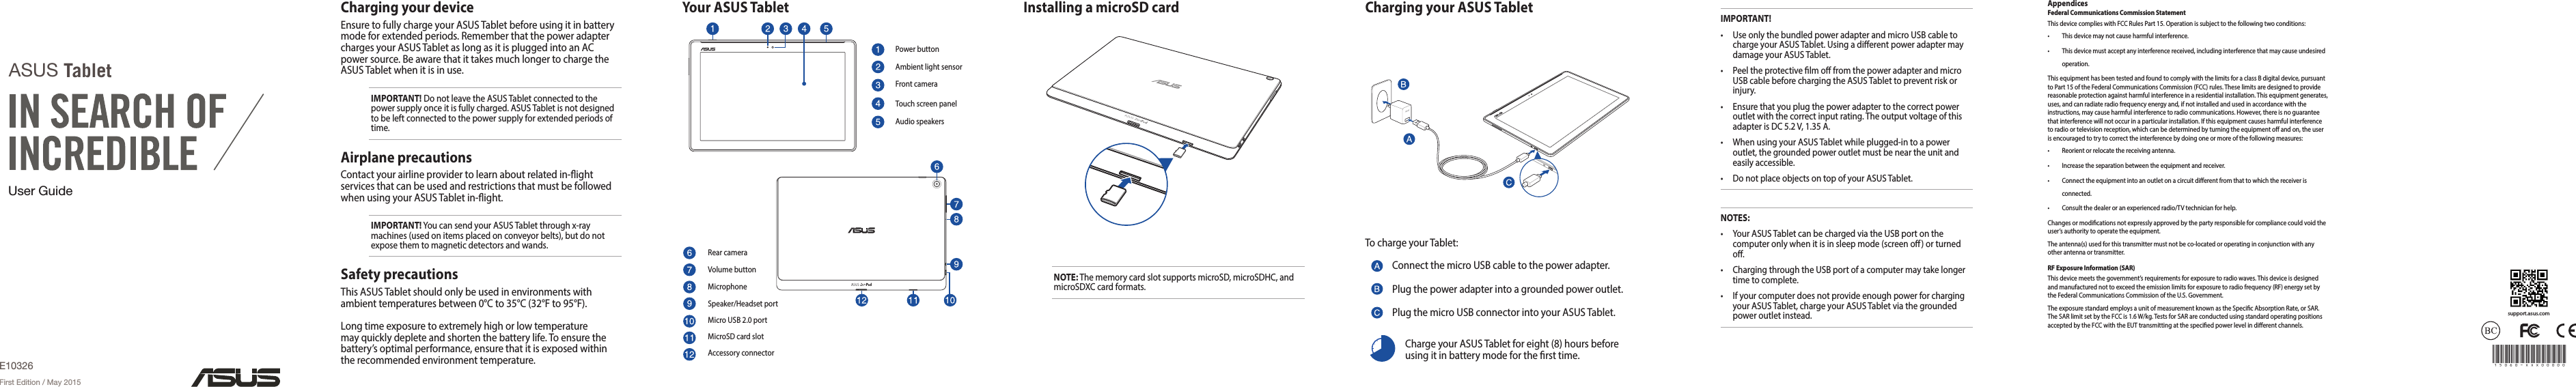 User GuideASUS TabletE10326First Edition / May 2015IMPORTANT!• UseonlythebundledpoweradapterandmicroUSBcabletochargeyourASUSTablet.UsingadierentpoweradaptermaydamageyourASUSTablet.• PeeltheprotectivelmofromthepoweradapterandmicroUSBcablebeforechargingtheASUSTablettopreventriskorinjury.• Ensurethatyouplugthepoweradaptertothecorrectpoweroutletwiththecorrectinputrating.TheoutputvoltageofthisadapterisDC5.2V,1.35A.• WhenusingyourASUSTabletwhileplugged-intoapoweroutlet,thegroundedpoweroutletmustbeneartheunitandeasilyaccessible.• DonotplaceobjectsontopofyourASUSTablet.NOTES:• YourASUSTabletcanbechargedviatheUSBportonthecomputeronlywhenitisinsleepmode(screeno)orturnedo.• ChargingthroughtheUSBportofacomputermaytakelongertimetocomplete.• IfyourcomputerdoesnotprovideenoughpowerforchargingyourASUSTablet,chargeyourASUSTabletviathegroundedpoweroutletinstead.Installing a microSD card Charging your ASUS TabletTochargeyourTablet:ConnectthemicroUSBcabletothepoweradapter.Plugthepoweradapterintoagroundedpoweroutlet.PlugthemicroUSBconnectorintoyourASUSTablet.ChargeyourASUSTabletforeight(8)hoursbeforeusingitinbatterymodeforthersttime.Your ASUS TabletPowerbuttonAmbientlightsensorFrontcameraTouchscreenpanelAudiospeakersRearcameraVolumebuttonMicrophoneSpeaker/HeadsetportMicroUSB2.0portMicroSDcardslotAccessoryconnector15060-xxx00000support.asus.comNOTE:ThememorycardslotsupportsmicroSD,microSDHC,andmicroSDXCcardformats.Charging your deviceEnsuretofullychargeyourASUSTabletbeforeusingitinbatterymodeforextendedperiods.RememberthatthepoweradapterchargesyourASUSTabletaslongasitispluggedintoanACpowersource.BeawarethatittakesmuchlongertochargetheASUSTabletwhenitisinuse.IMPORTANT!DonotleavetheASUSTabletconnectedtothepowersupplyonceitisfullycharged.ASUSTabletisnotdesignedtobeleftconnectedtothepowersupplyforextendedperiodsoftime.Airplane precautionsContactyourairlineprovidertolearnaboutrelatedin-ightservicesthatcanbeusedandrestrictionsthatmustbefollowedwhenusingyourASUSTabletin-ight.IMPORTANT!YoucansendyourASUSTabletthroughx-raymachines(usedonitemsplacedonconveyorbelts),butdonotexposethemtomagneticdetectorsandwands.Safety precautionsThisASUSTabletshouldonlybeusedinenvironmentswithambienttemperaturesbetween0°Cto35°C(32°Fto95°F).Longtimeexposuretoextremelyhighorlowtemperaturemayquicklydepleteandshortenthebatterylife.Toensurethebattery’soptimalperformance,ensurethatitisexposedwithintherecommendedenvironmenttemperature.AppendicesFederal Communications Commission StatementThisdevicecomplieswithFCCRulesPart15.Operationissubjecttothefollowingtwoconditions:• Thisdevicemaynotcauseharmfulinterference.• Thisdevicemustacceptanyinterferencereceived,includinginterferencethatmaycauseundesiredoperation.ThisequipmenthasbeentestedandfoundtocomplywiththelimitsforaclassBdigitaldevice,pursuanttoPart15oftheFederalCommunicationsCommission(FCC)rules.Theselimitsaredesignedtoprovidereasonableprotectionagainstharmfulinterferenceinaresidentialinstallation.Thisequipmentgenerates,uses,andcanradiateradiofrequencyenergyand,ifnotinstalledandusedinaccordancewiththeinstructions,maycauseharmfulinterferencetoradiocommunications.However,thereisnoguaranteethatinterferencewillnotoccurinaparticularinstallation.Ifthisequipmentcausesharmfulinterferencetoradioortelevisionreception,whichcanbedeterminedbyturningtheequipmentoandon,theuserisencouragedtotrytocorrecttheinterferencebydoingoneormoreofthefollowingmeasures:• Reorientorrelocatethereceivingantenna.• Increasetheseparationbetweentheequipmentandreceiver.• Connecttheequipmentintoanoutletonacircuitdierentfromthattowhichthereceiverisconnected.• Consultthedealeroranexperiencedradio/TVtechnicianforhelp.Changesormodicationsnotexpresslyapprovedbythepartyresponsibleforcompliancecouldvoidtheuser‘sauthoritytooperatetheequipment.Theantenna(s)usedforthistransmittermustnotbeco-locatedoroperatinginconjunctionwithanyotherantennaortransmitter.RF Exposure Information (SAR)Thisdevicemeetsthegovernment’srequirementsforexposuretoradiowaves.Thisdeviceisdesignedandmanufacturednottoexceedtheemissionlimitsforexposuretoradiofrequency(RF)energysetbytheFederalCommunicationsCommissionoftheU.S.Government.TheexposurestandardemploysaunitofmeasurementknownastheSpecicAbsorptionRate,orSAR.TheSARlimitsetbytheFCCis1.6W/kg.TestsforSARareconductedusingstandardoperatingpositionsacceptedbytheFCCwiththeEUTtransmittingatthespeciedpowerlevelindierentchannels.